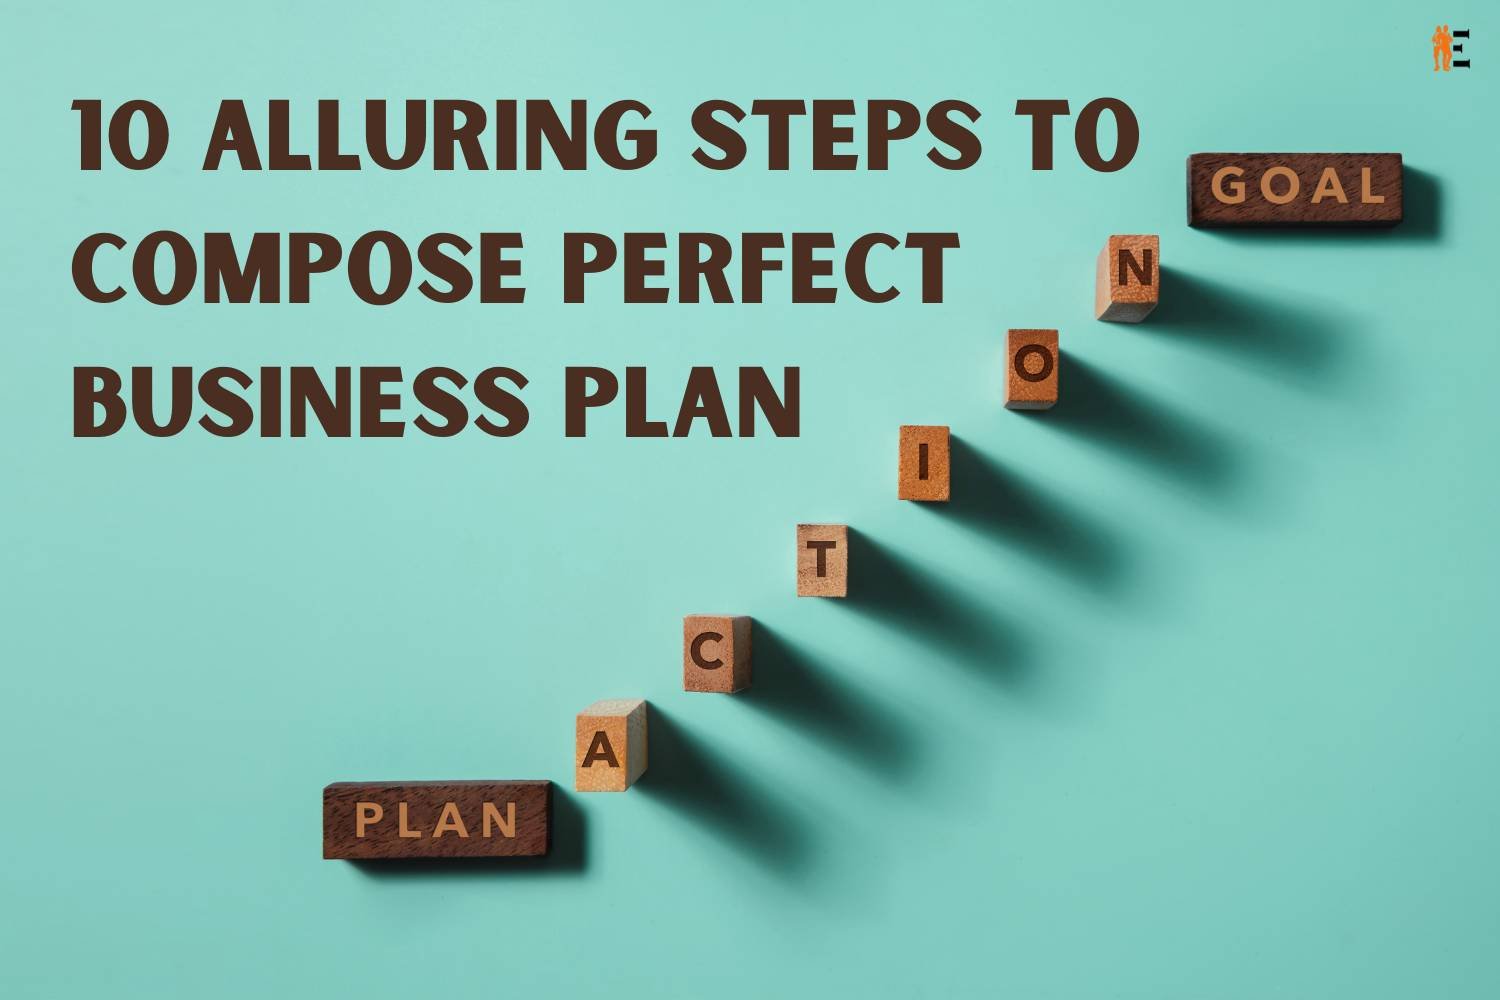 10 Alluring Steps to Compose Perfect Business Plan | The Entrepreneur Review